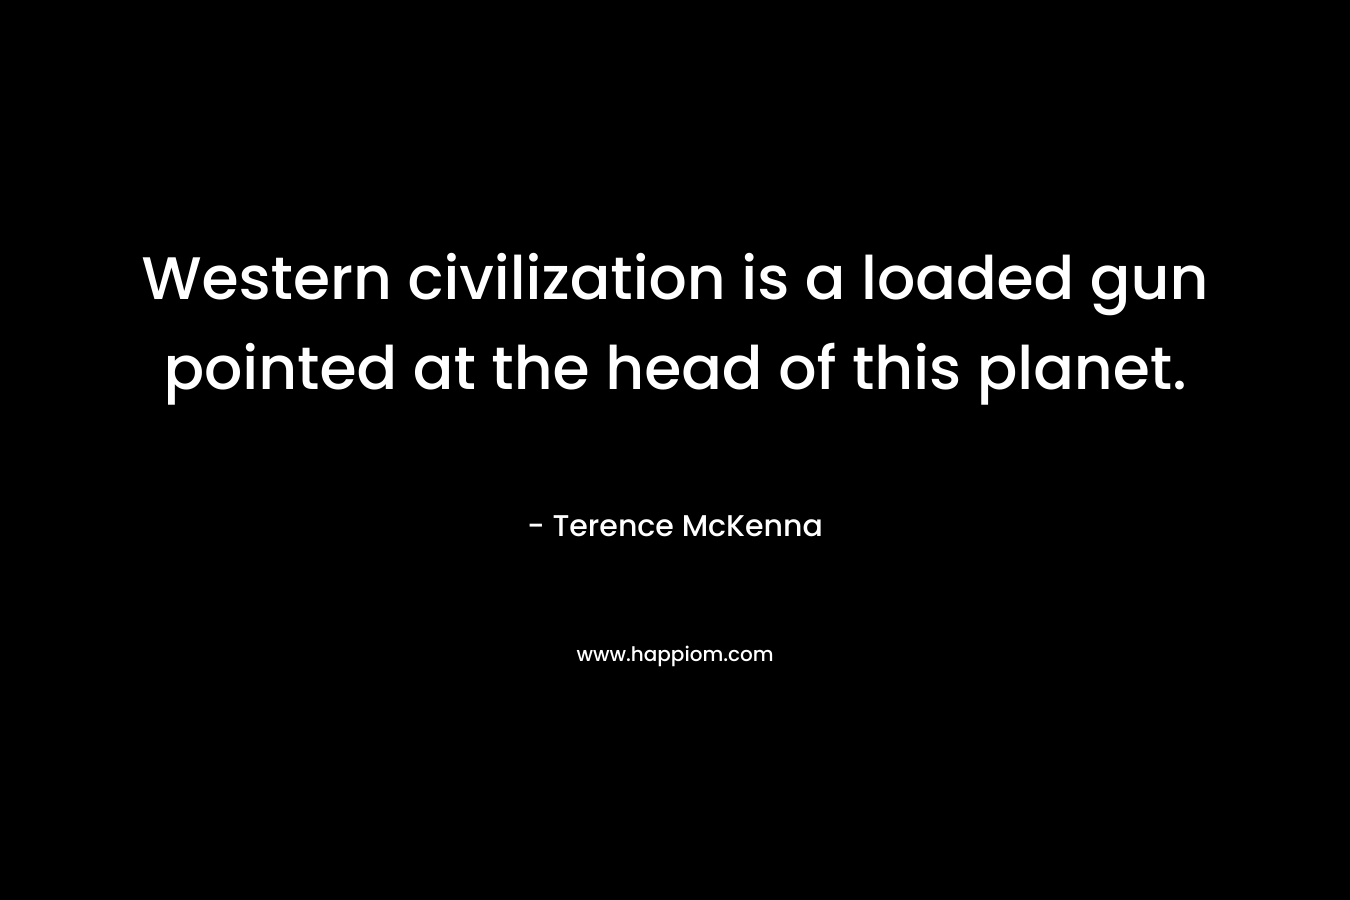 Western civilization is a loaded gun pointed at the head of this planet.